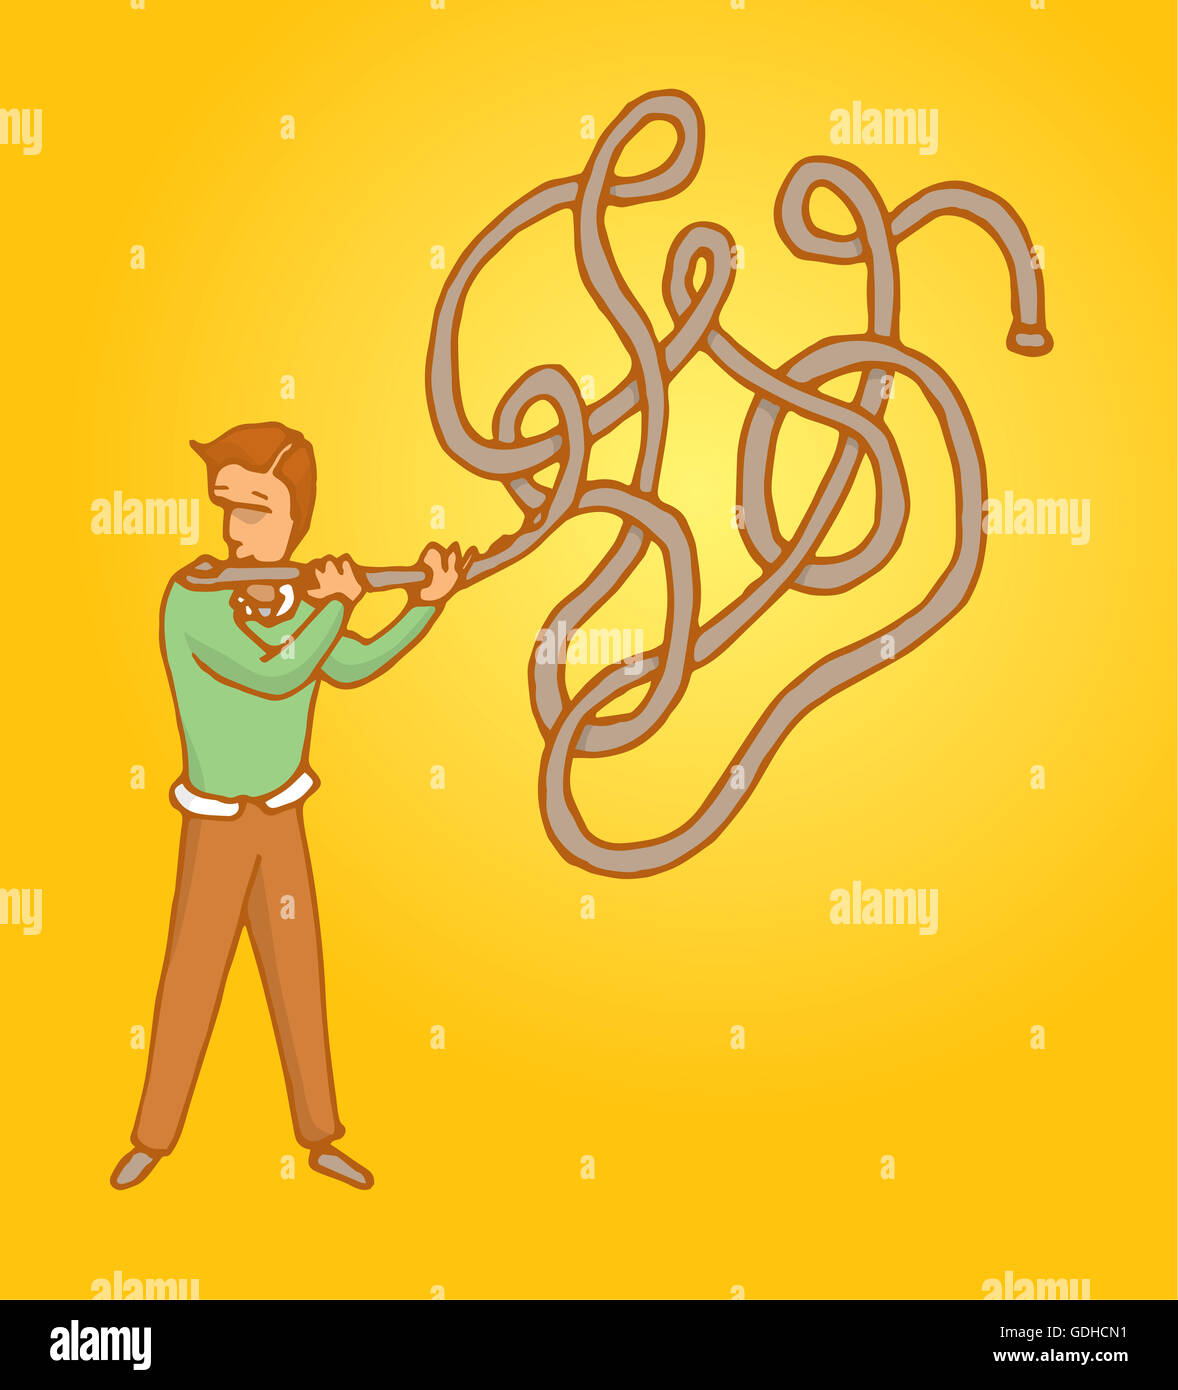 Cartoon illustration of man playing music or improvising on a tangled complex flute Stock Photo